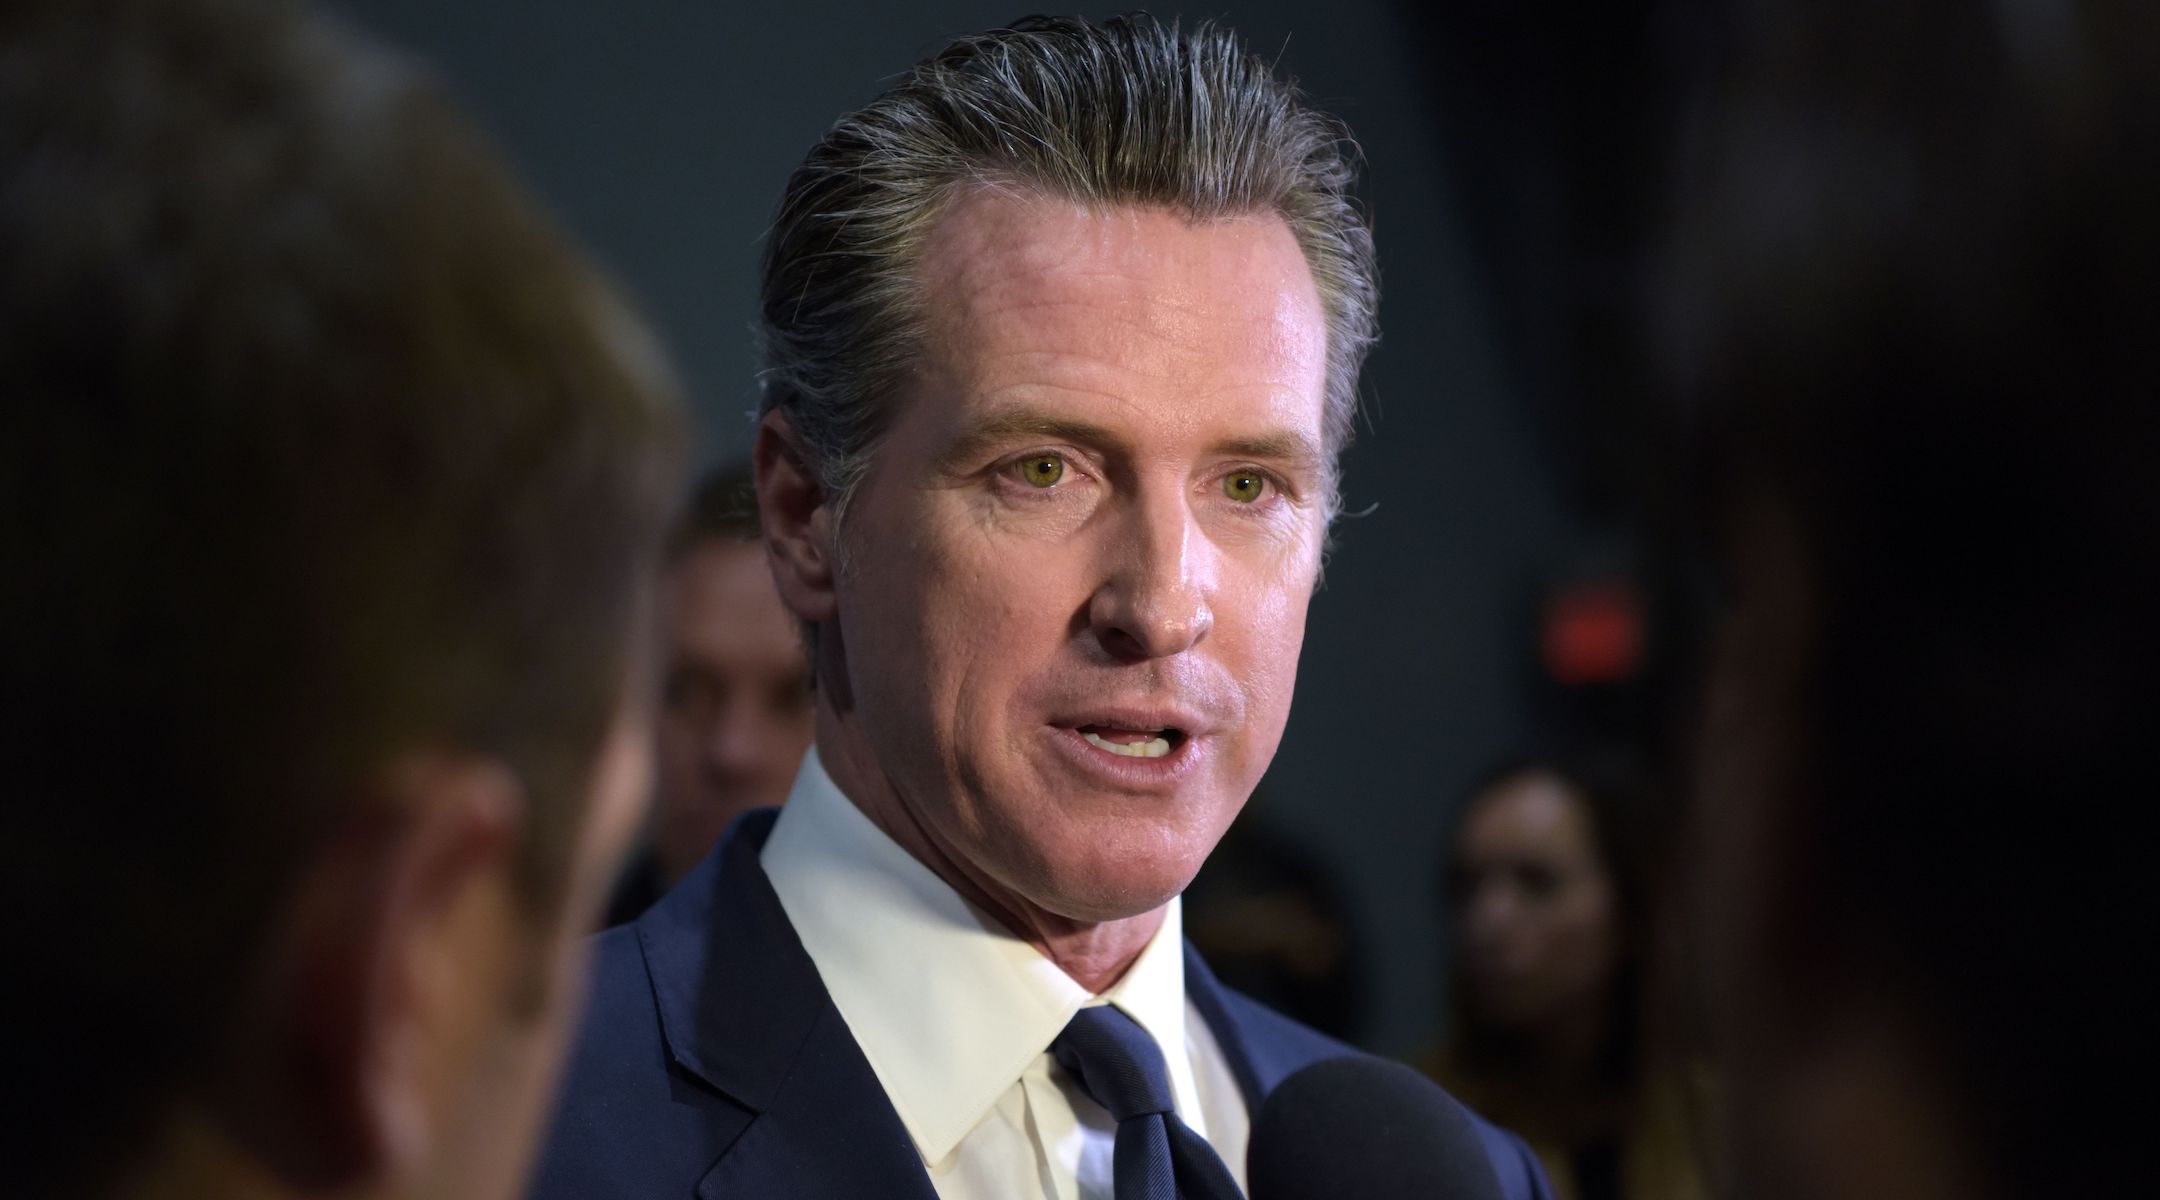 California Gov. Gavin Newsom, pictured here in 2019, vetoed a bill to make the ethnic studies curriculum a graduation requirement following objections to the content of its first draft. (Agustin Paullier/AFP via Getty Images)